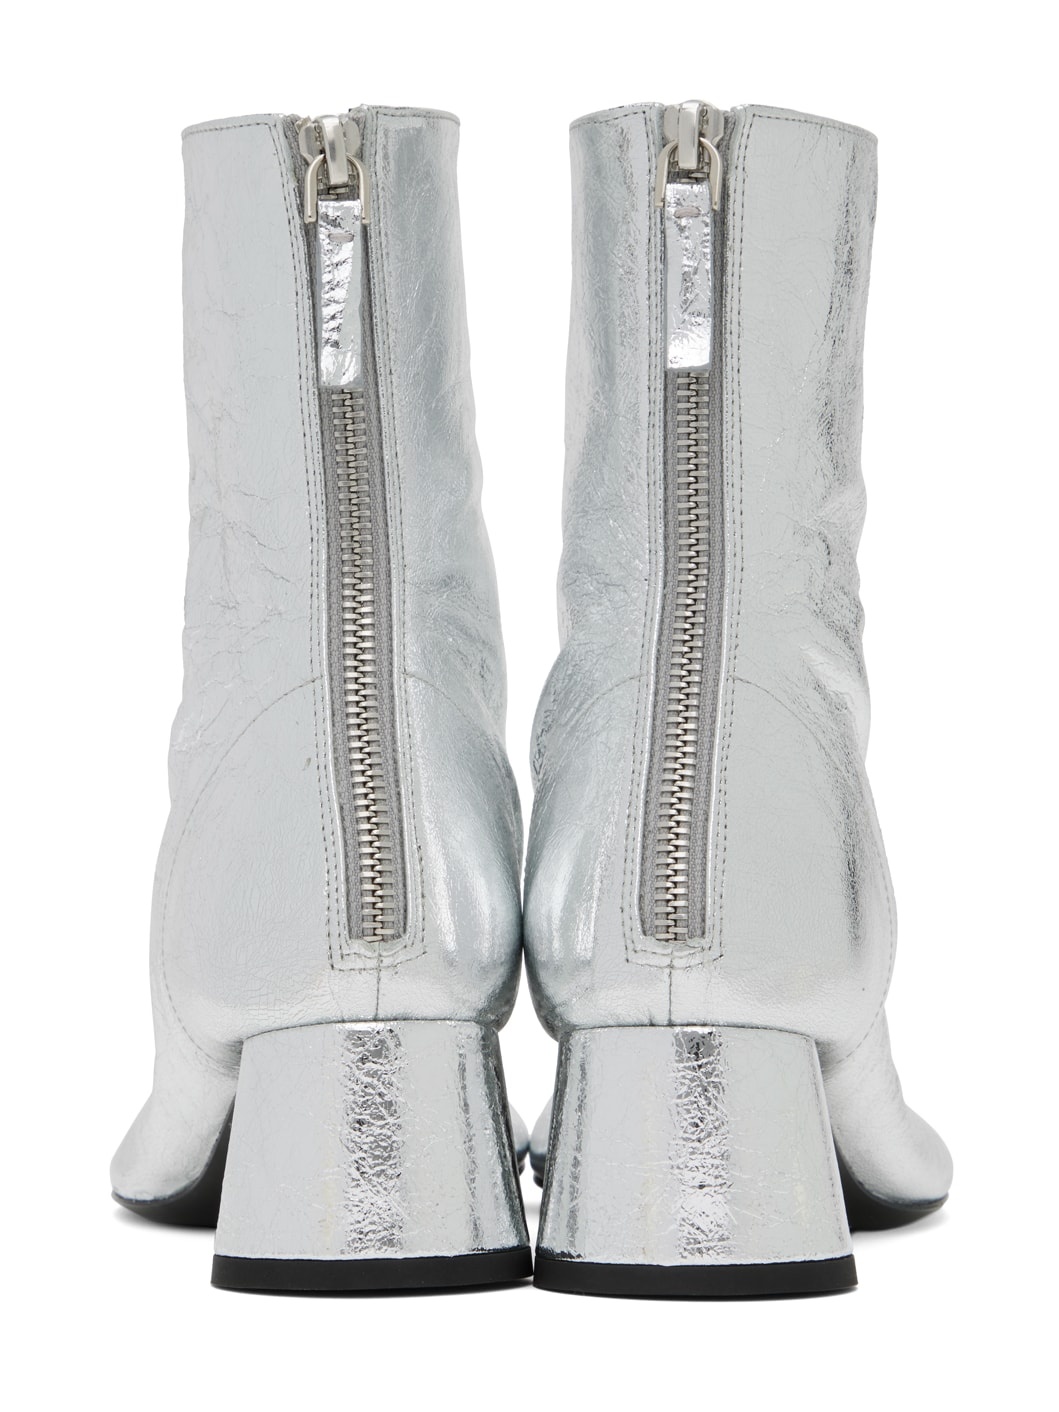 Silver Glove Boots - 2